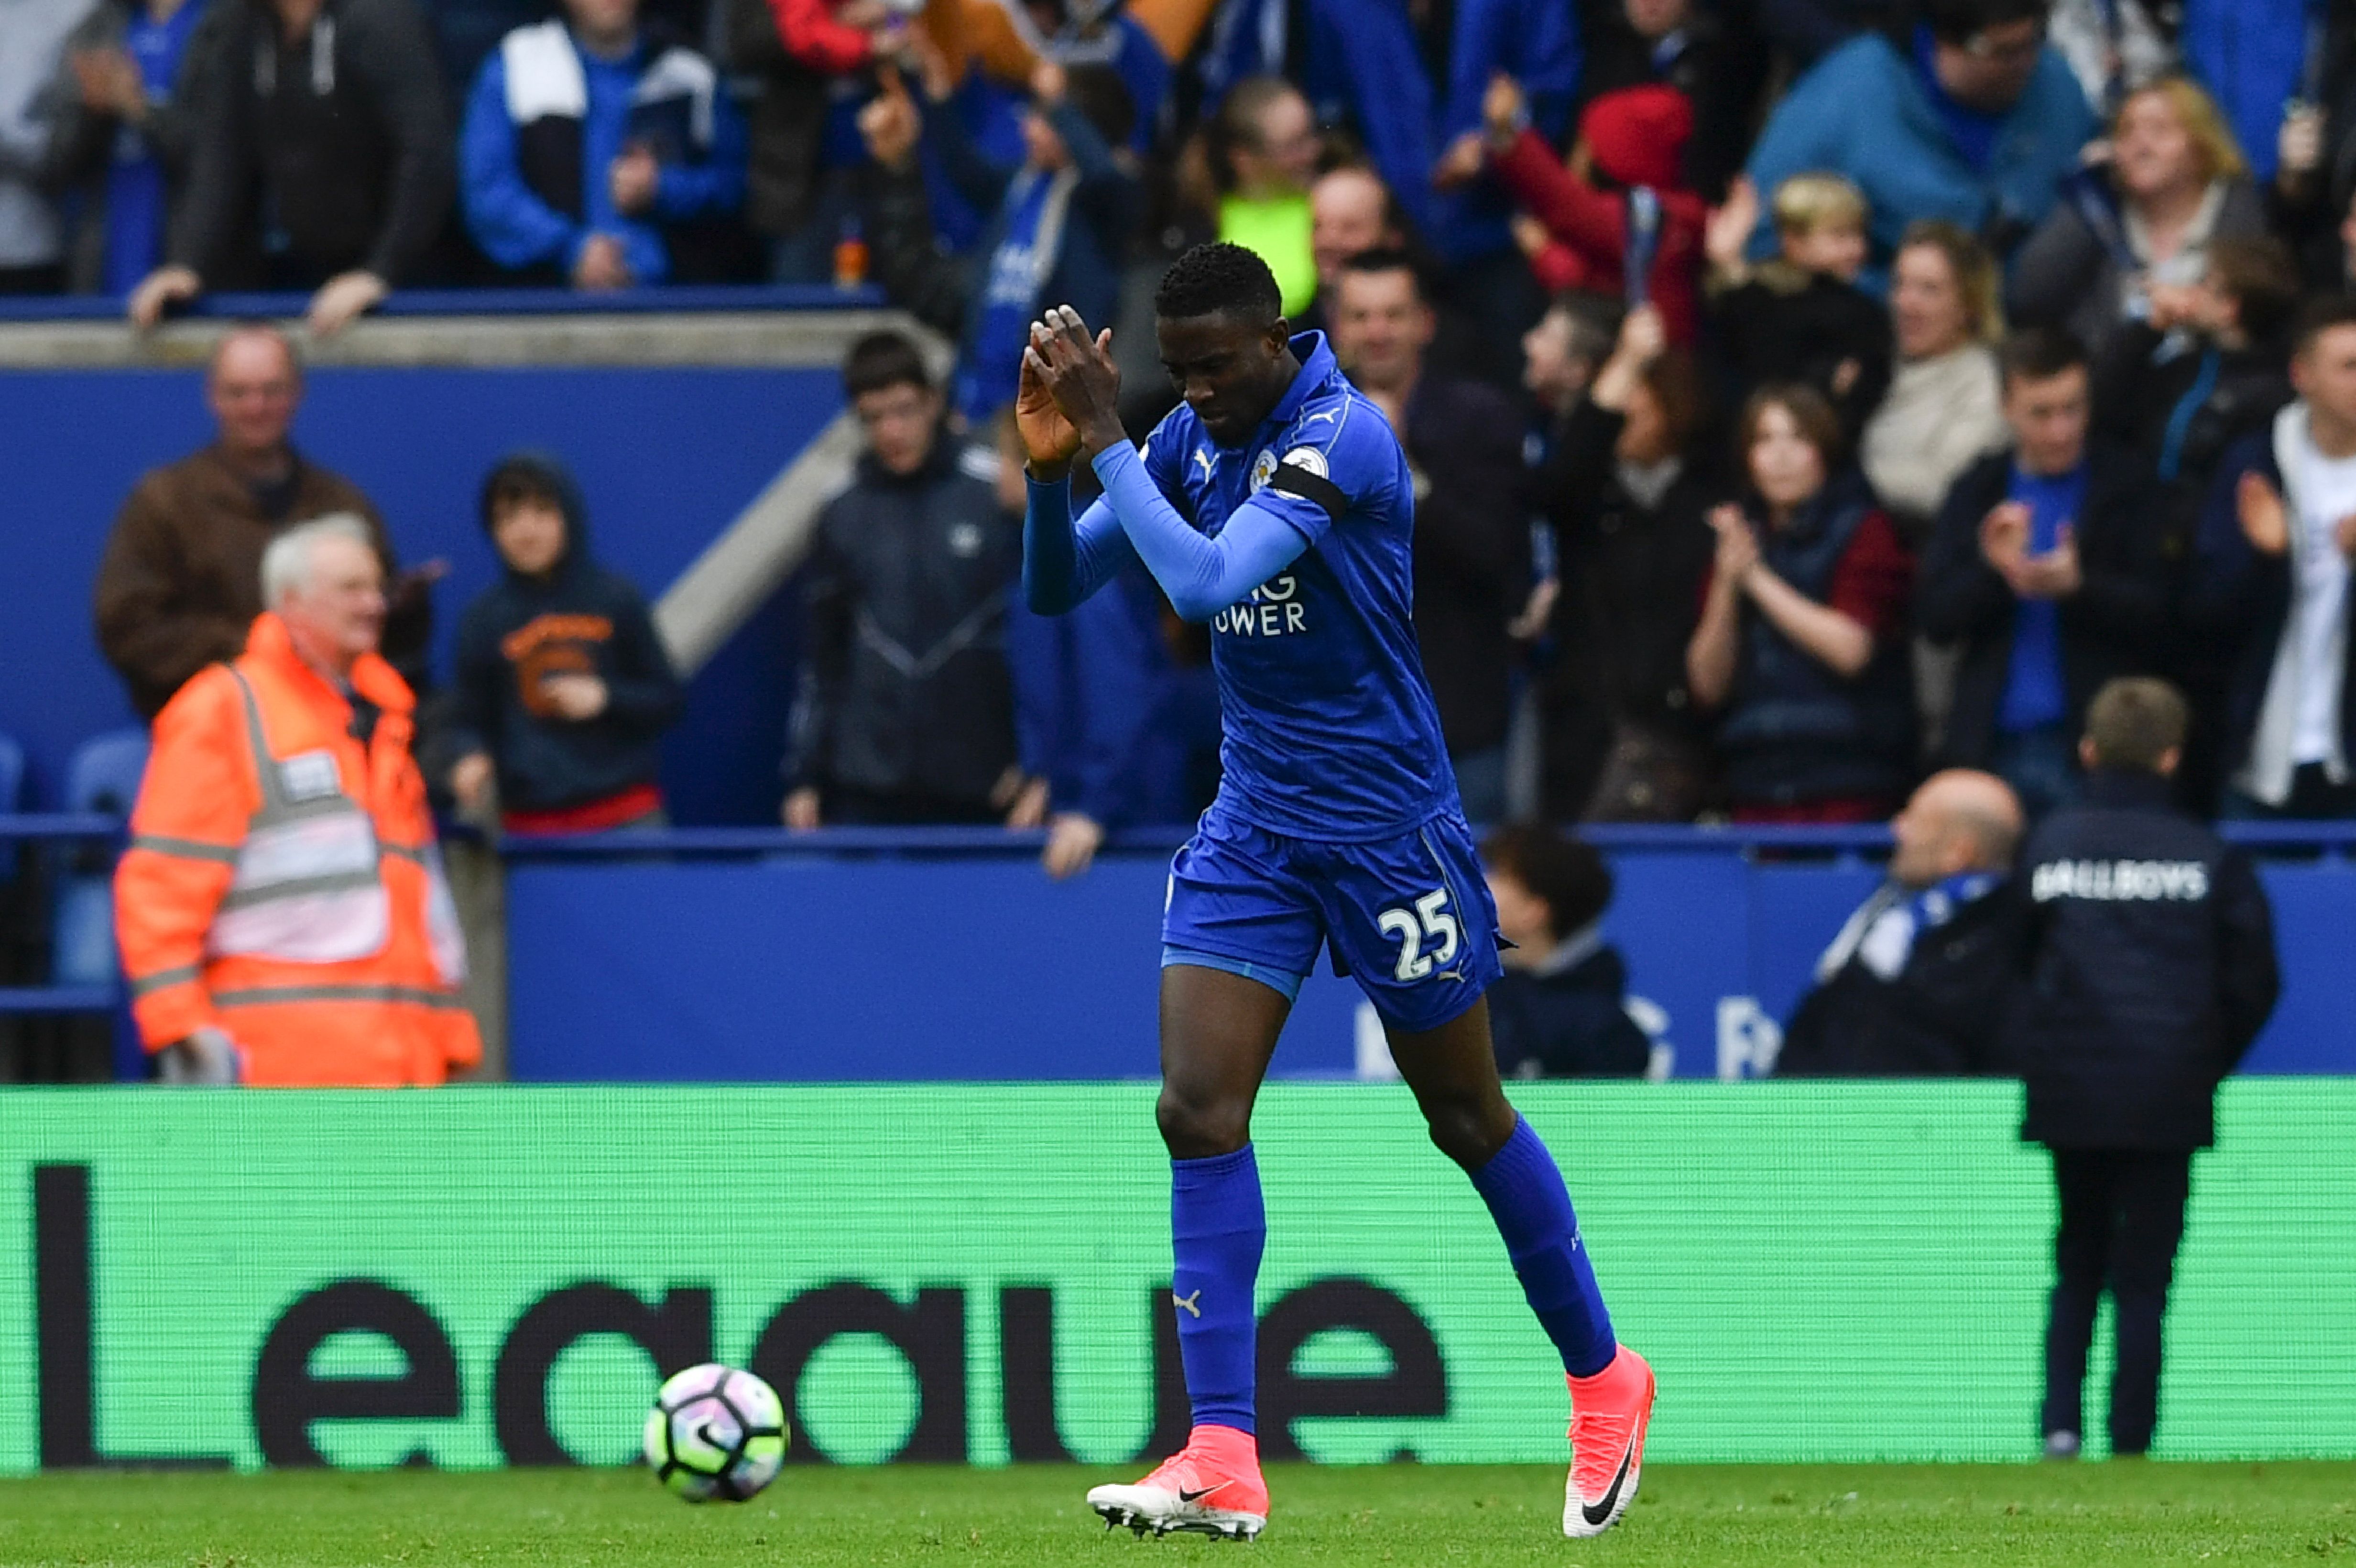 Leicester City's Nigerian midfielder Wilfred Ndidi celebrates scoring the opening goal during the English Premier League football match between Leicester City and Stoke City at King Power Stadium in Leicester, central England on April 1, 2017. / AFP PHOTO / Ben STANSALL / RESTRICTED TO EDITORIAL USE. No use with unauthorized audio, video, data, fixture lists, club/league logos or 'live' services. Online in-match use limited to 75 images, no video emulation. No use in betting, games or single club/league/player publications.  /         (Photo credit should read BEN STANSALL/AFP/Getty Images)